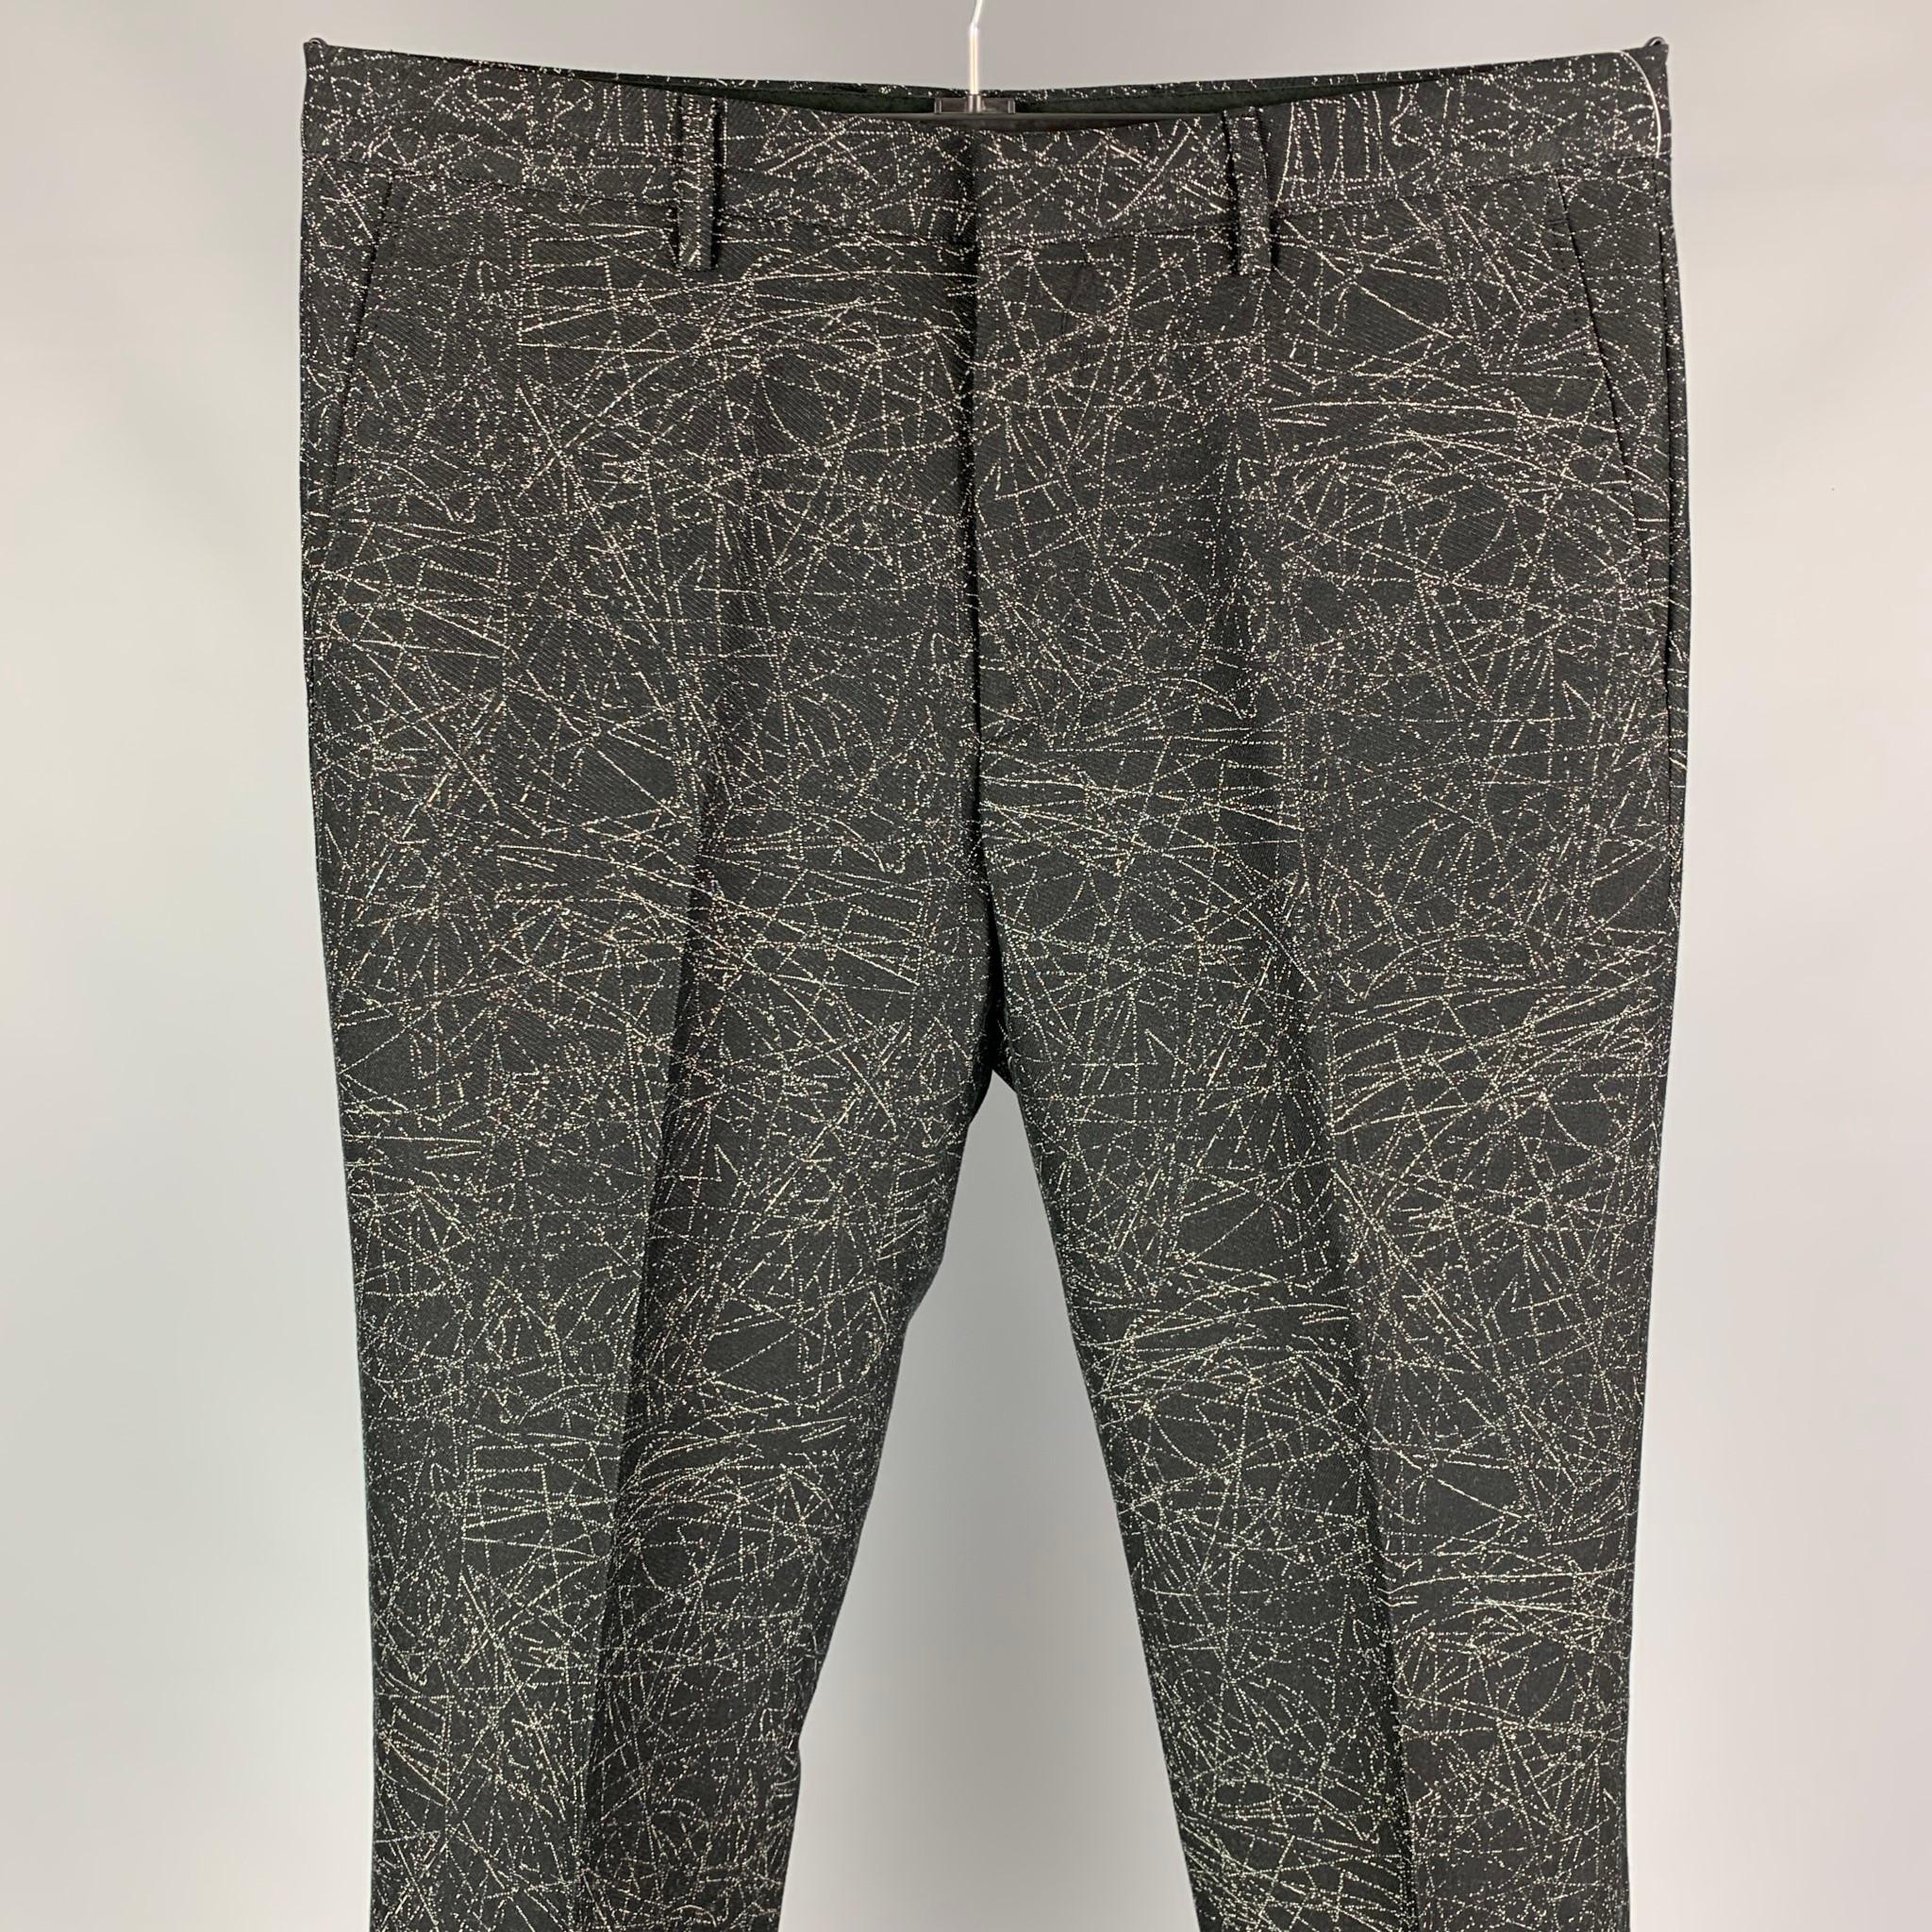 CALVIN KLEIN COLLECTION tuxedo dress pants comes in a black & grey print wool / cotton featuring a flat front, slit pocket, front tab, and a zip fly closure. 

Very Good Pre-Owned Condition.
Marked: 32/33

Measurements:

Waist: 33 in.
Rise: 10.5